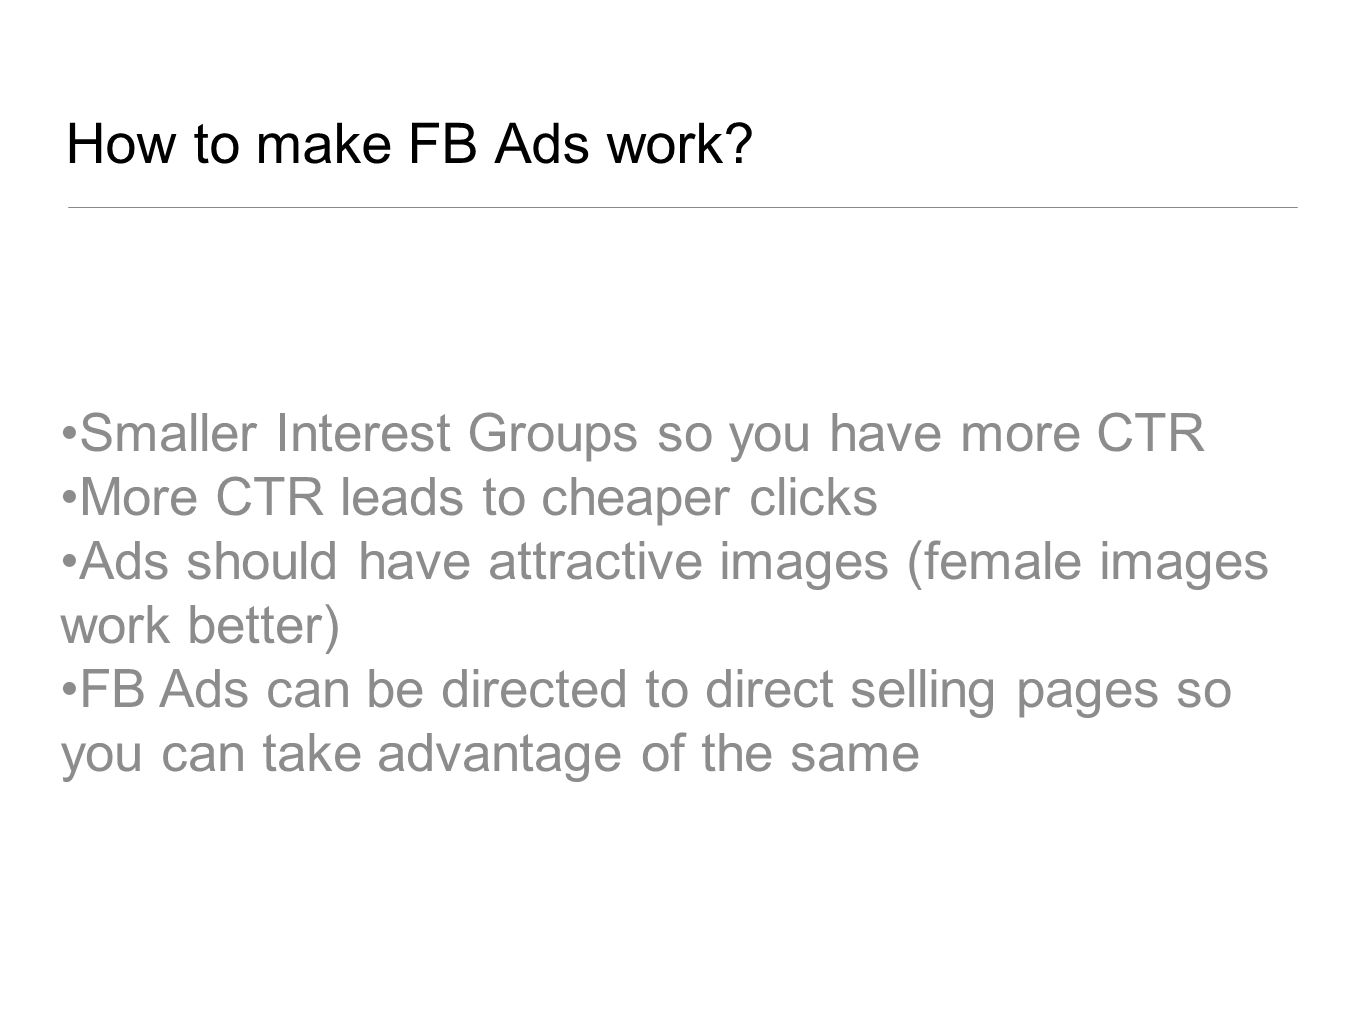 How to make FB Ads work.